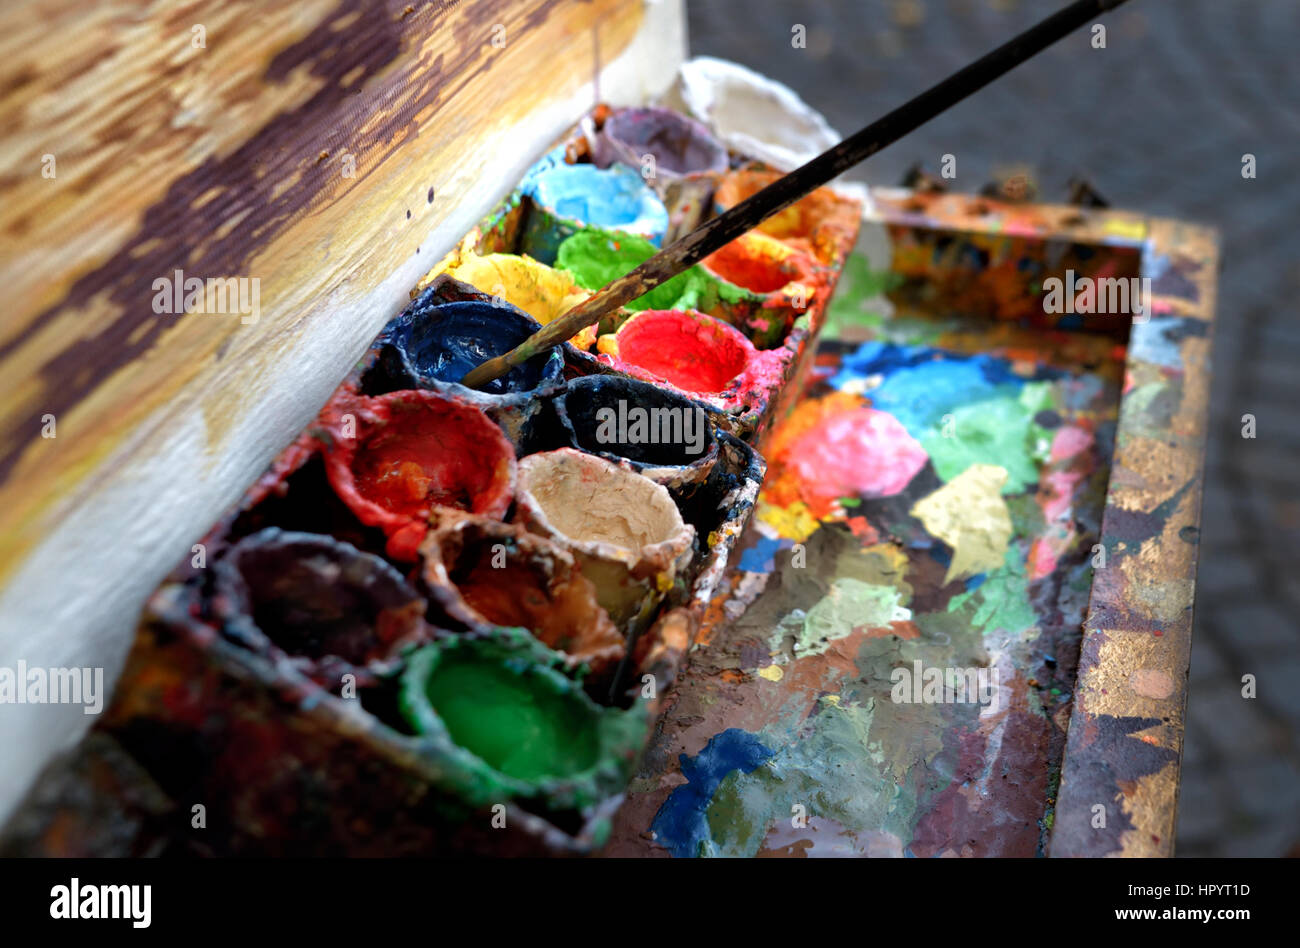 https://c8.alamy.com/comp/HPYT1D/artist-at-work-the-workplace-of-the-artist-brushes-paints-and-canvas-HPYT1D.jpg